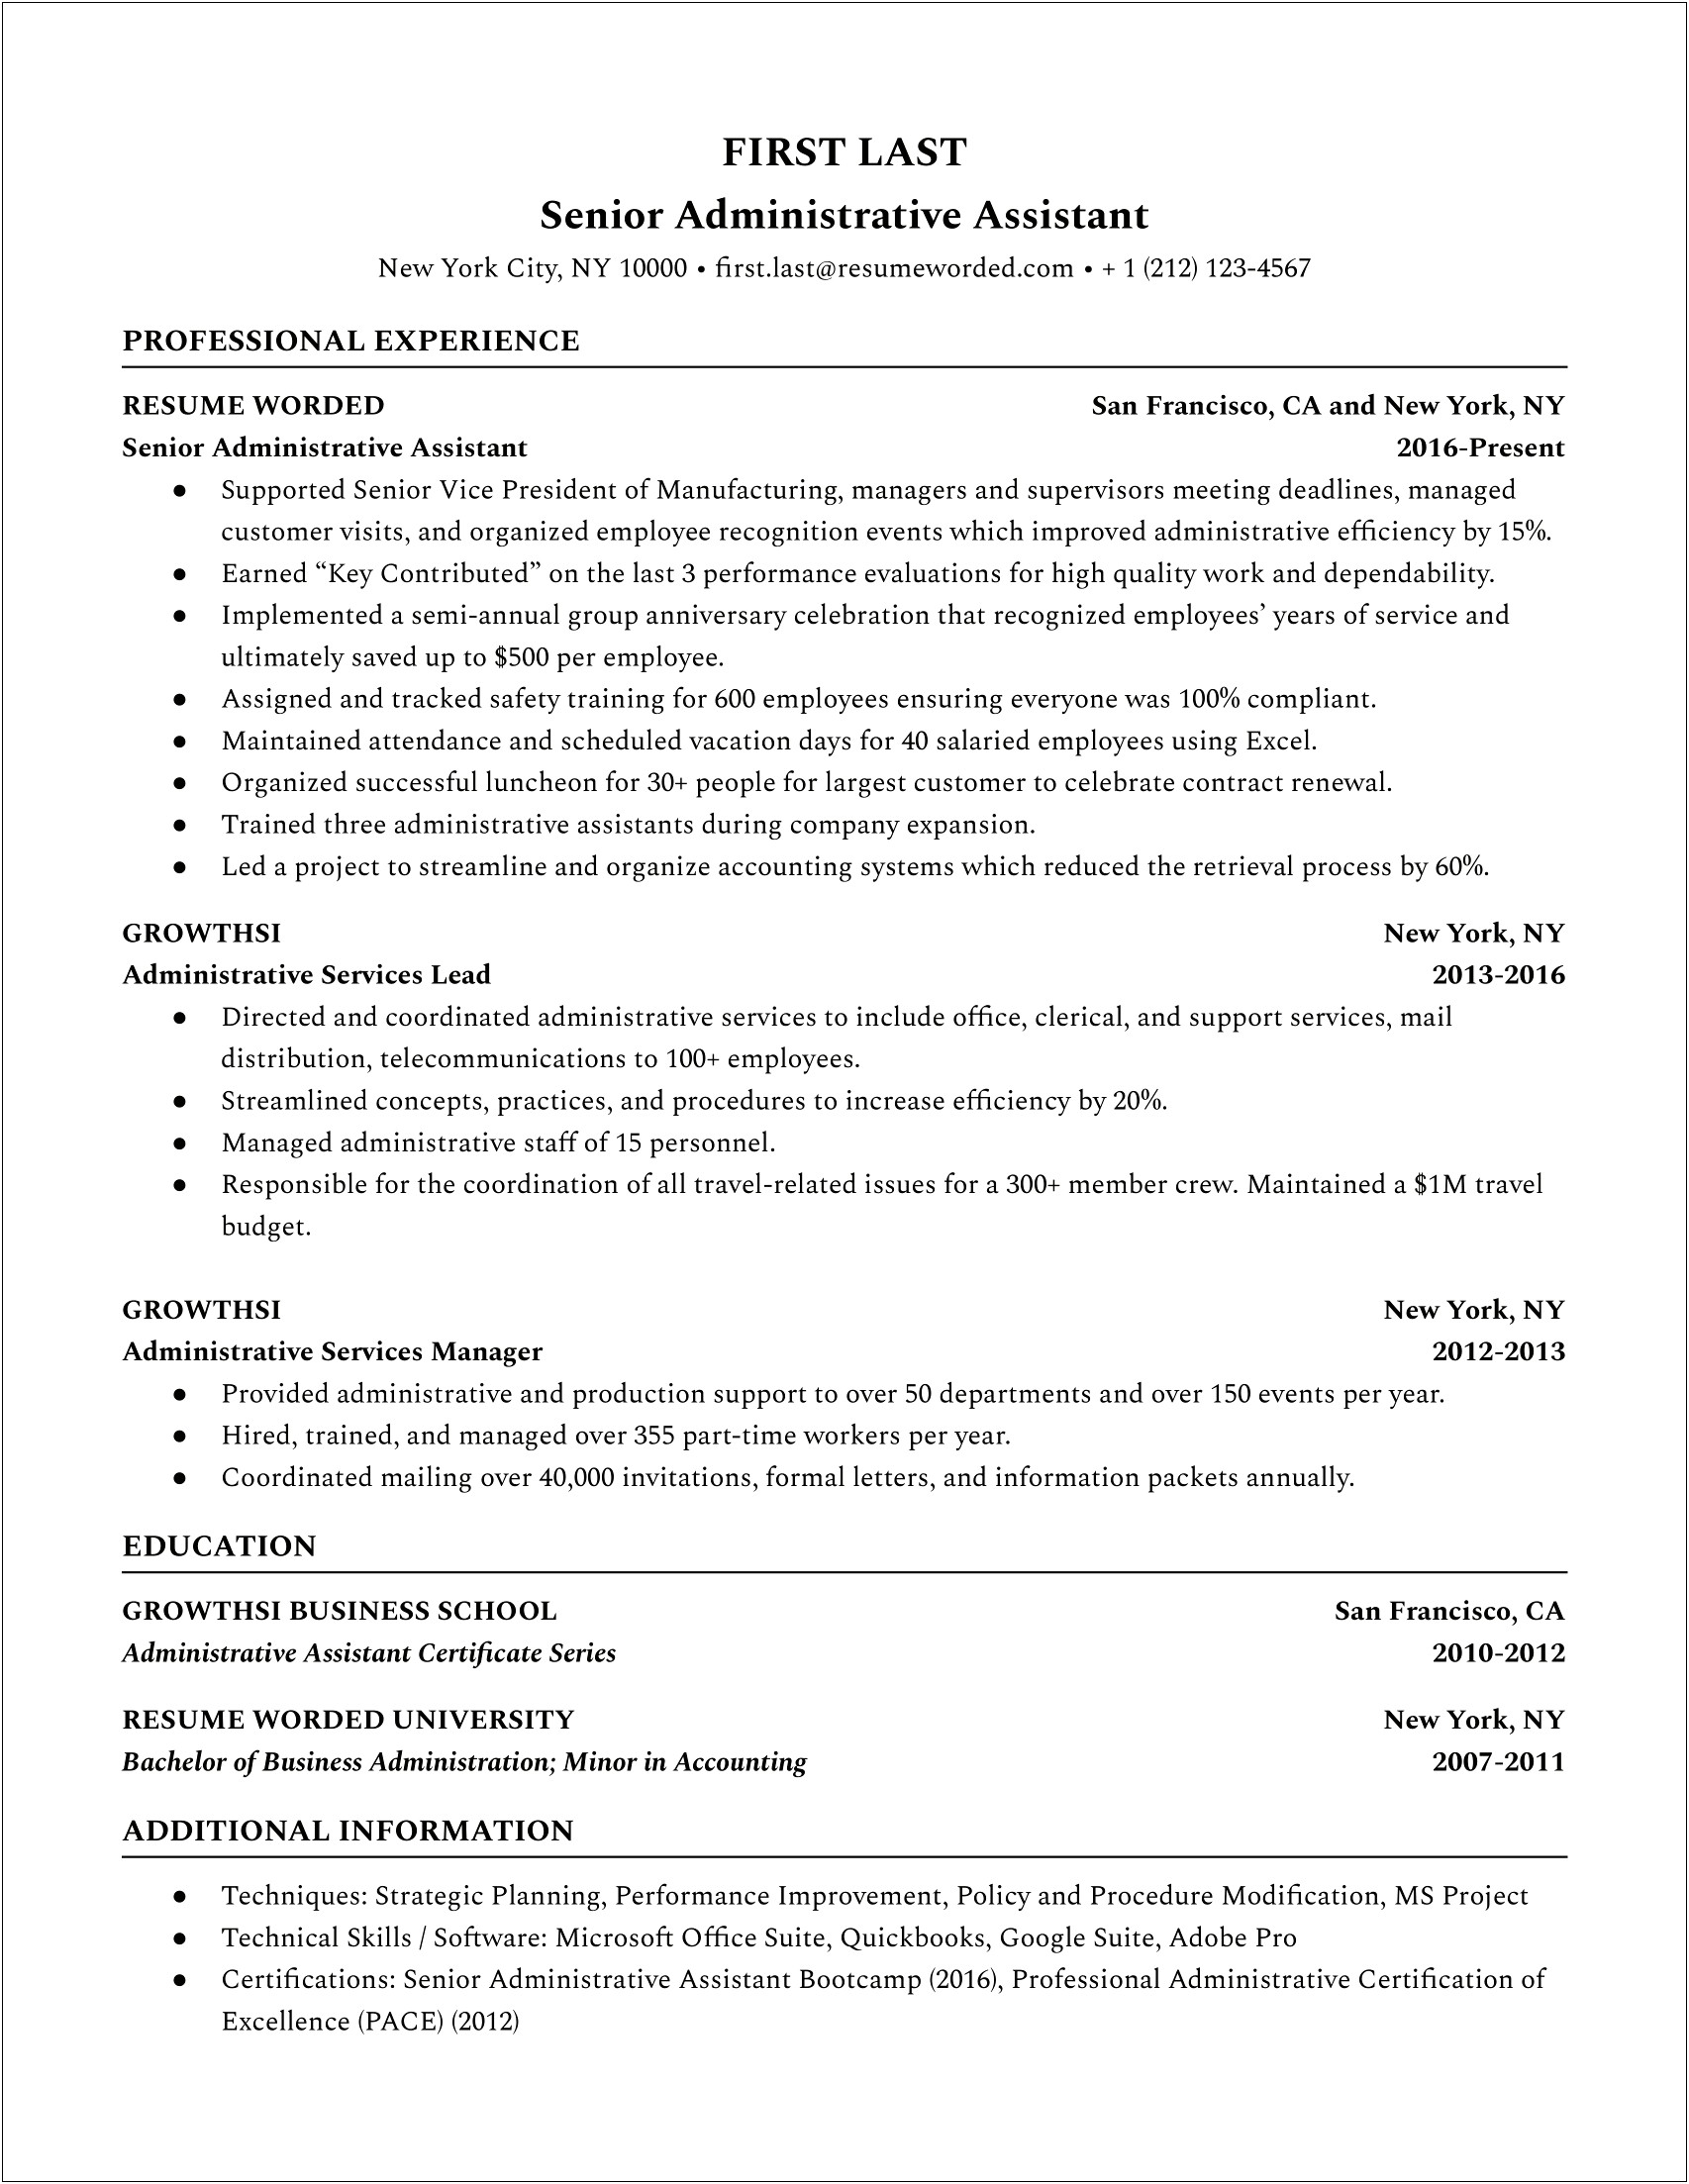 Resume Tips For Administrative Assistant Jobs